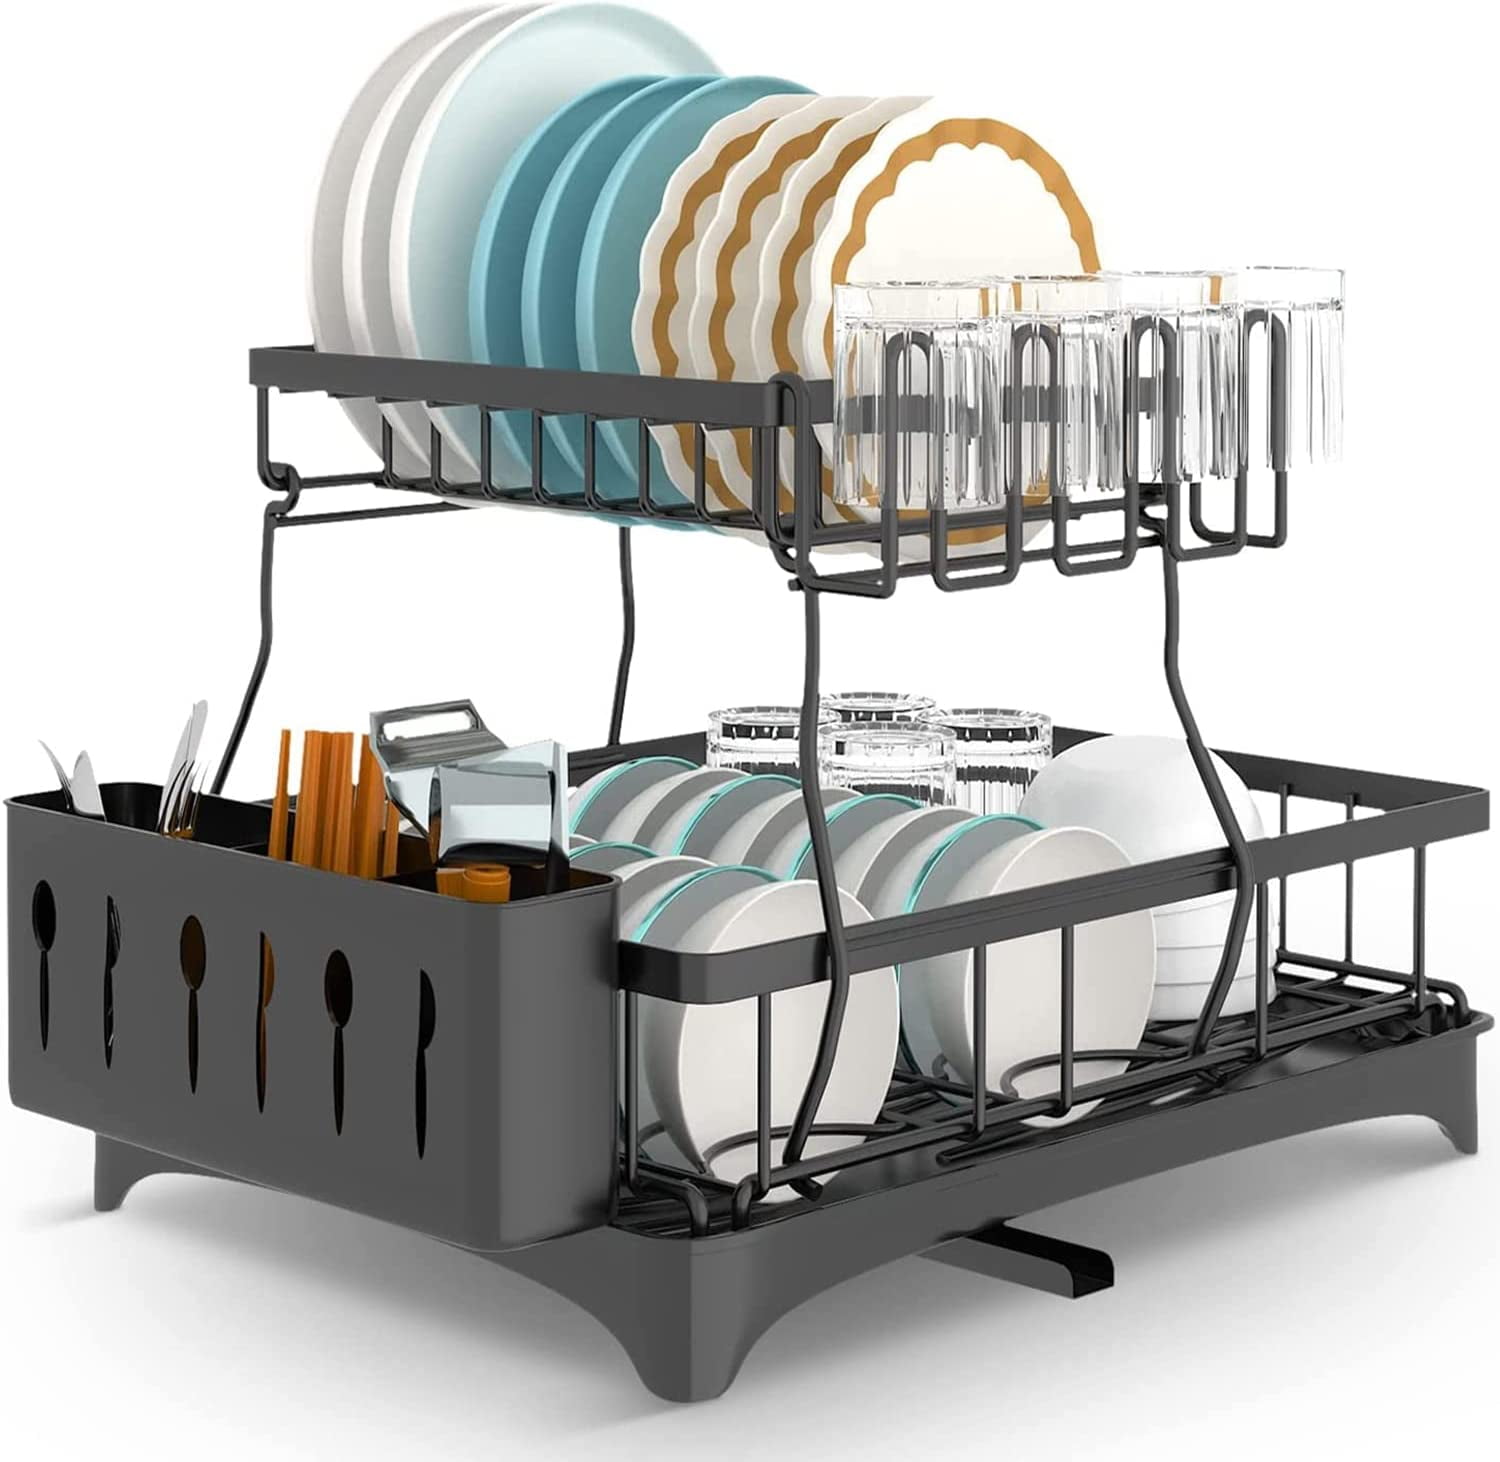 Dish Drying Rack Swedecor 2 Tier Rust-Resistant Dish Rack Small Dish Drainer with Drainboard Tray Cup Holder and Utensil Holder for Kitchen Countertop